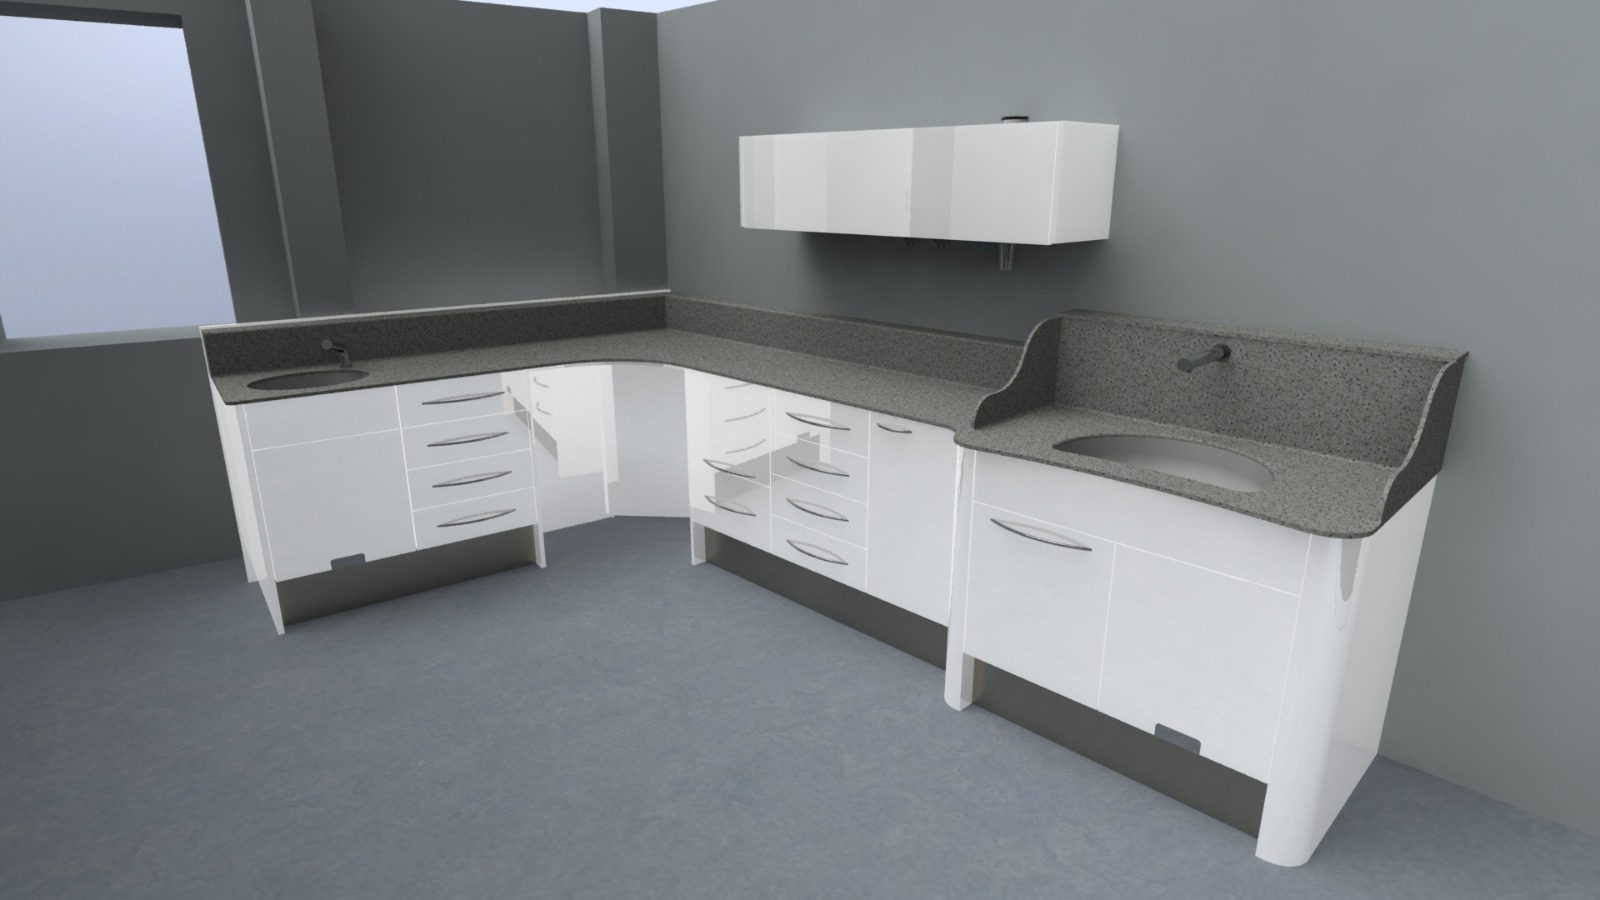 Dental_Cabinetry_3